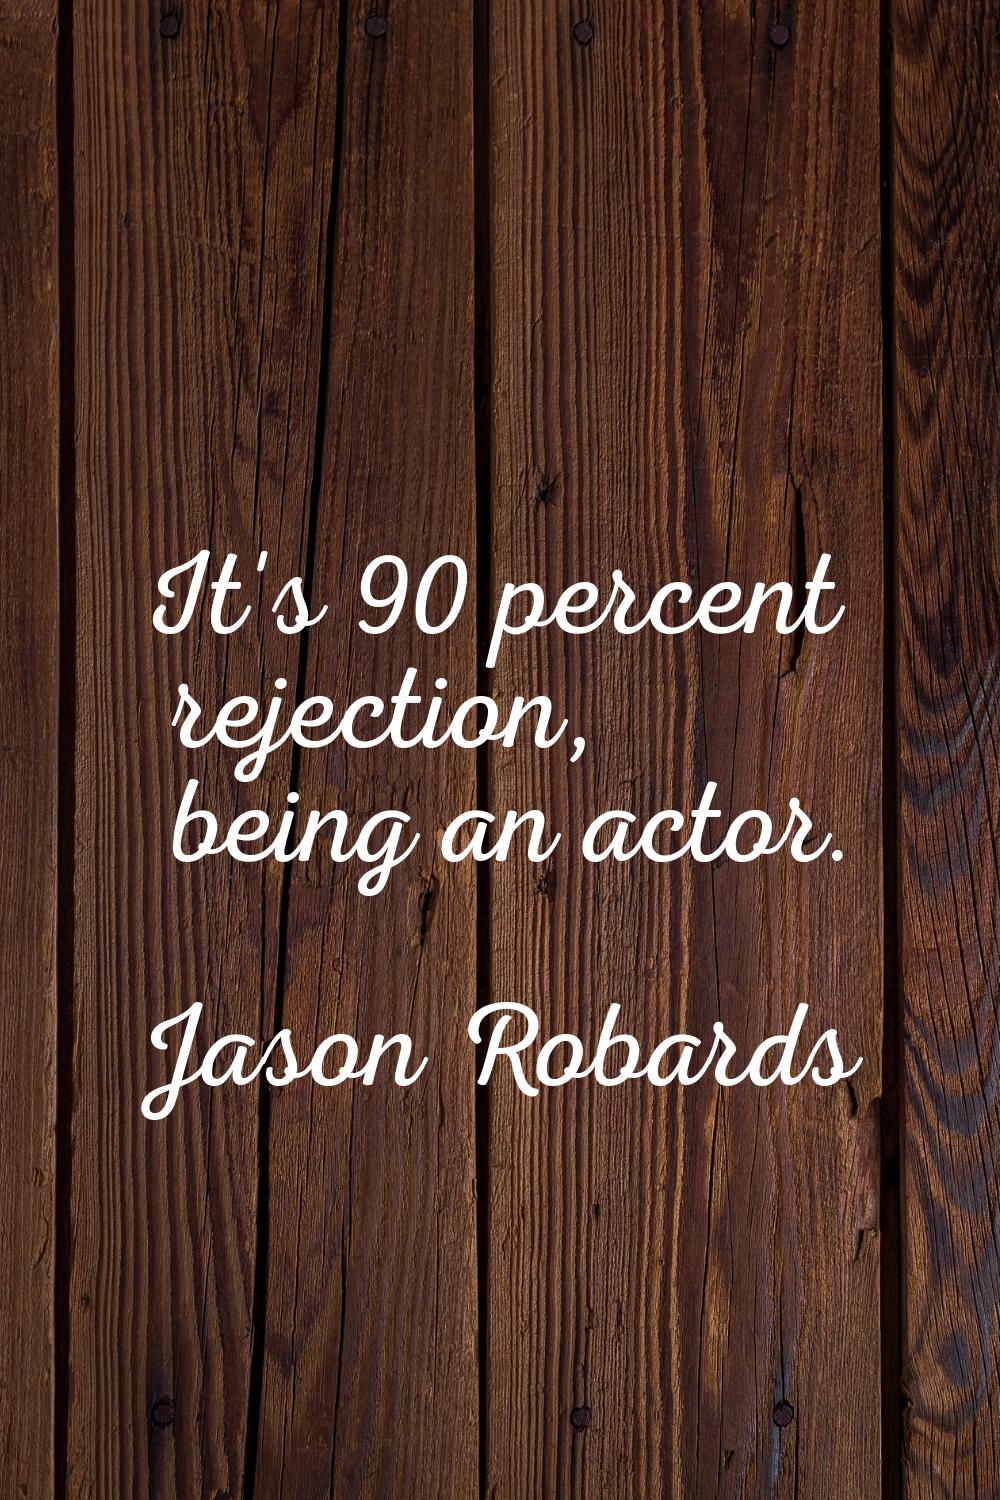 It's 90 percent rejection, being an actor.